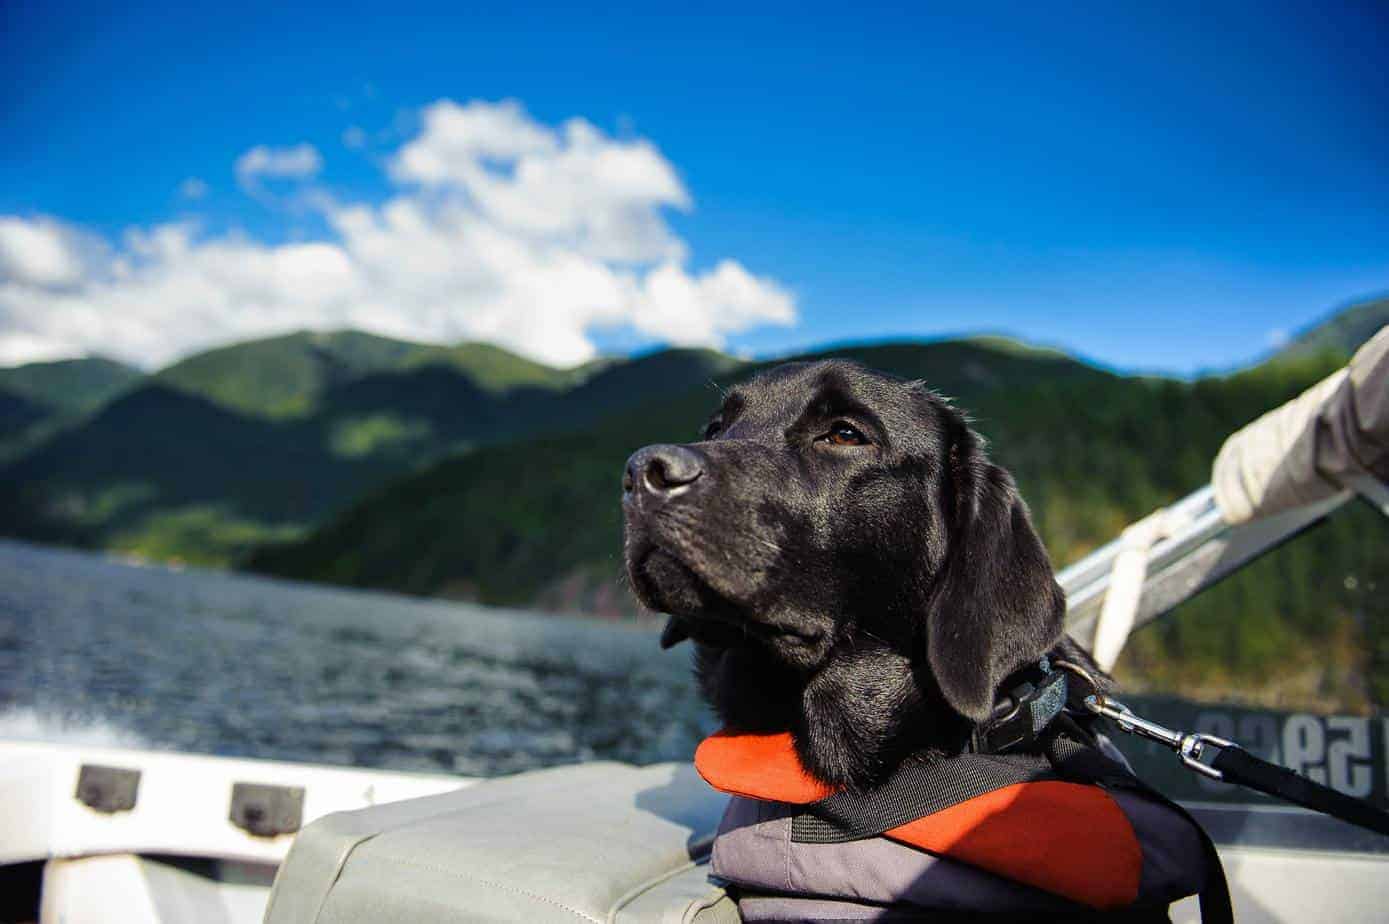 Black Labrador Retriever hangs out on a boat deck wearing a life jacket. Use dog boat safety tips to keep your pup safe and secure. Use life jackets, follow all dog laws, and provide a safe space for your dog to relax onboard.